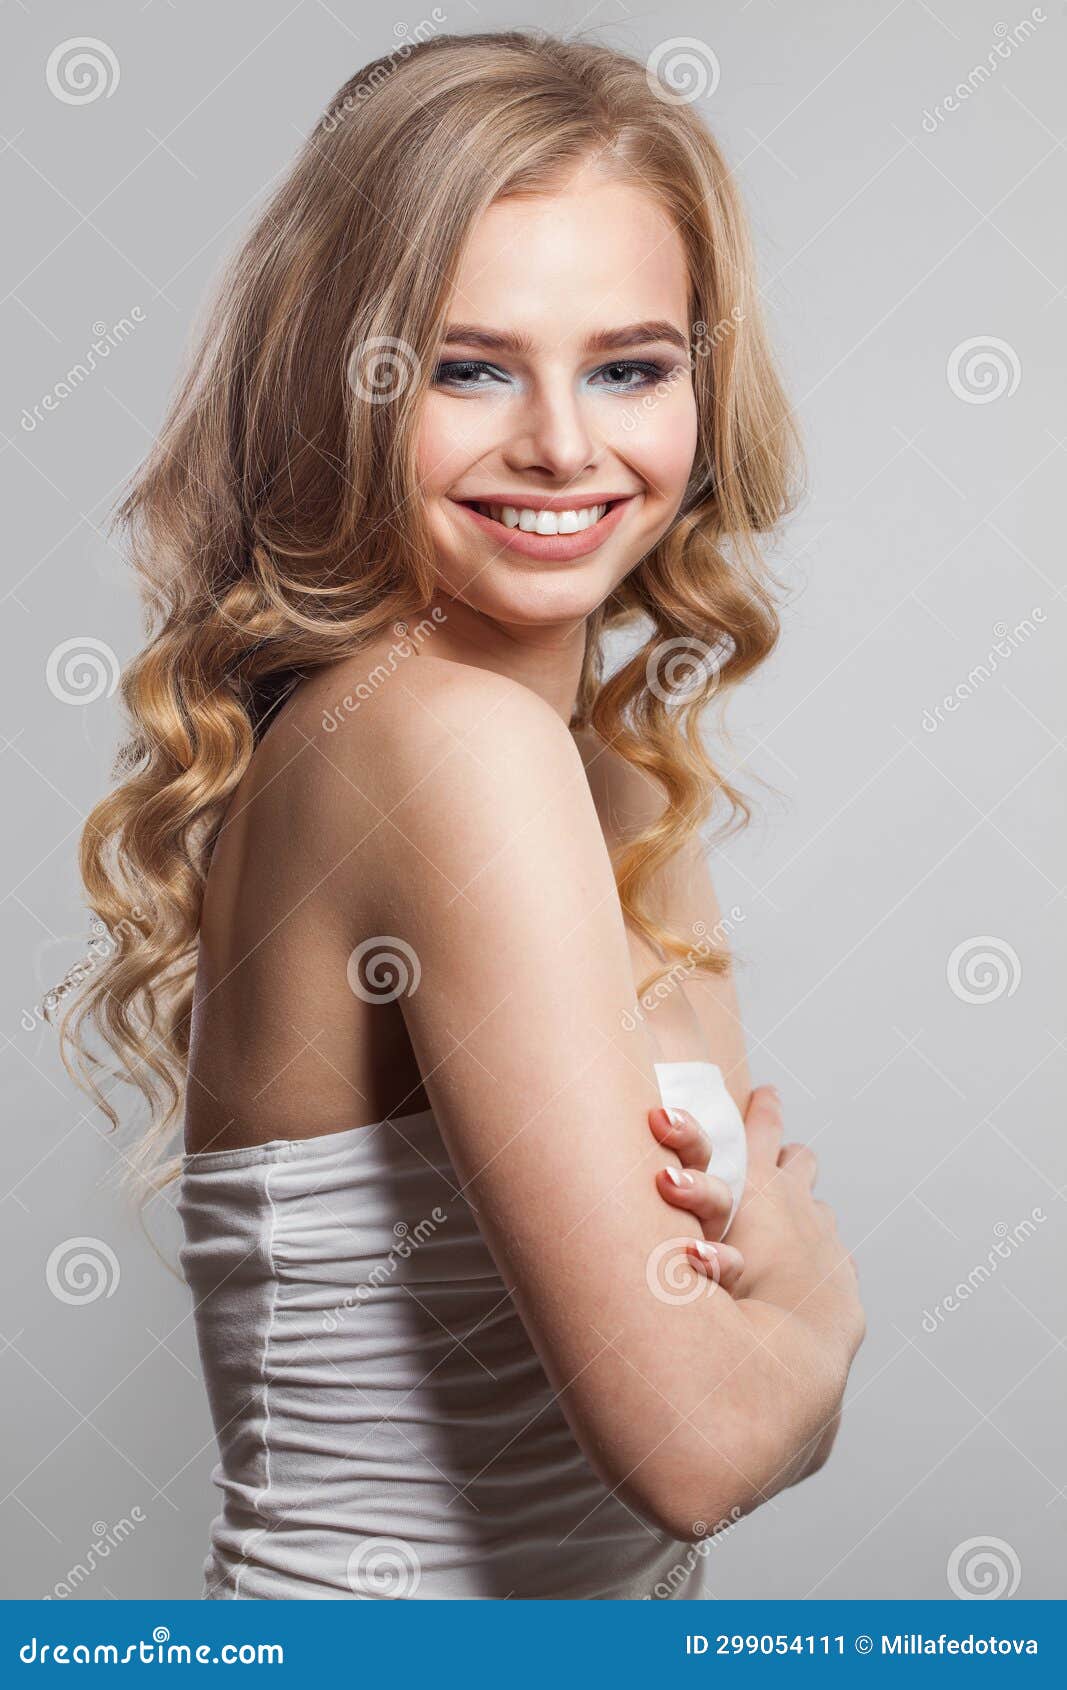 Cheerful Young Female Model Portrait Blonde Woman With Long Wavy Hair Makeup And Clean Skin On 